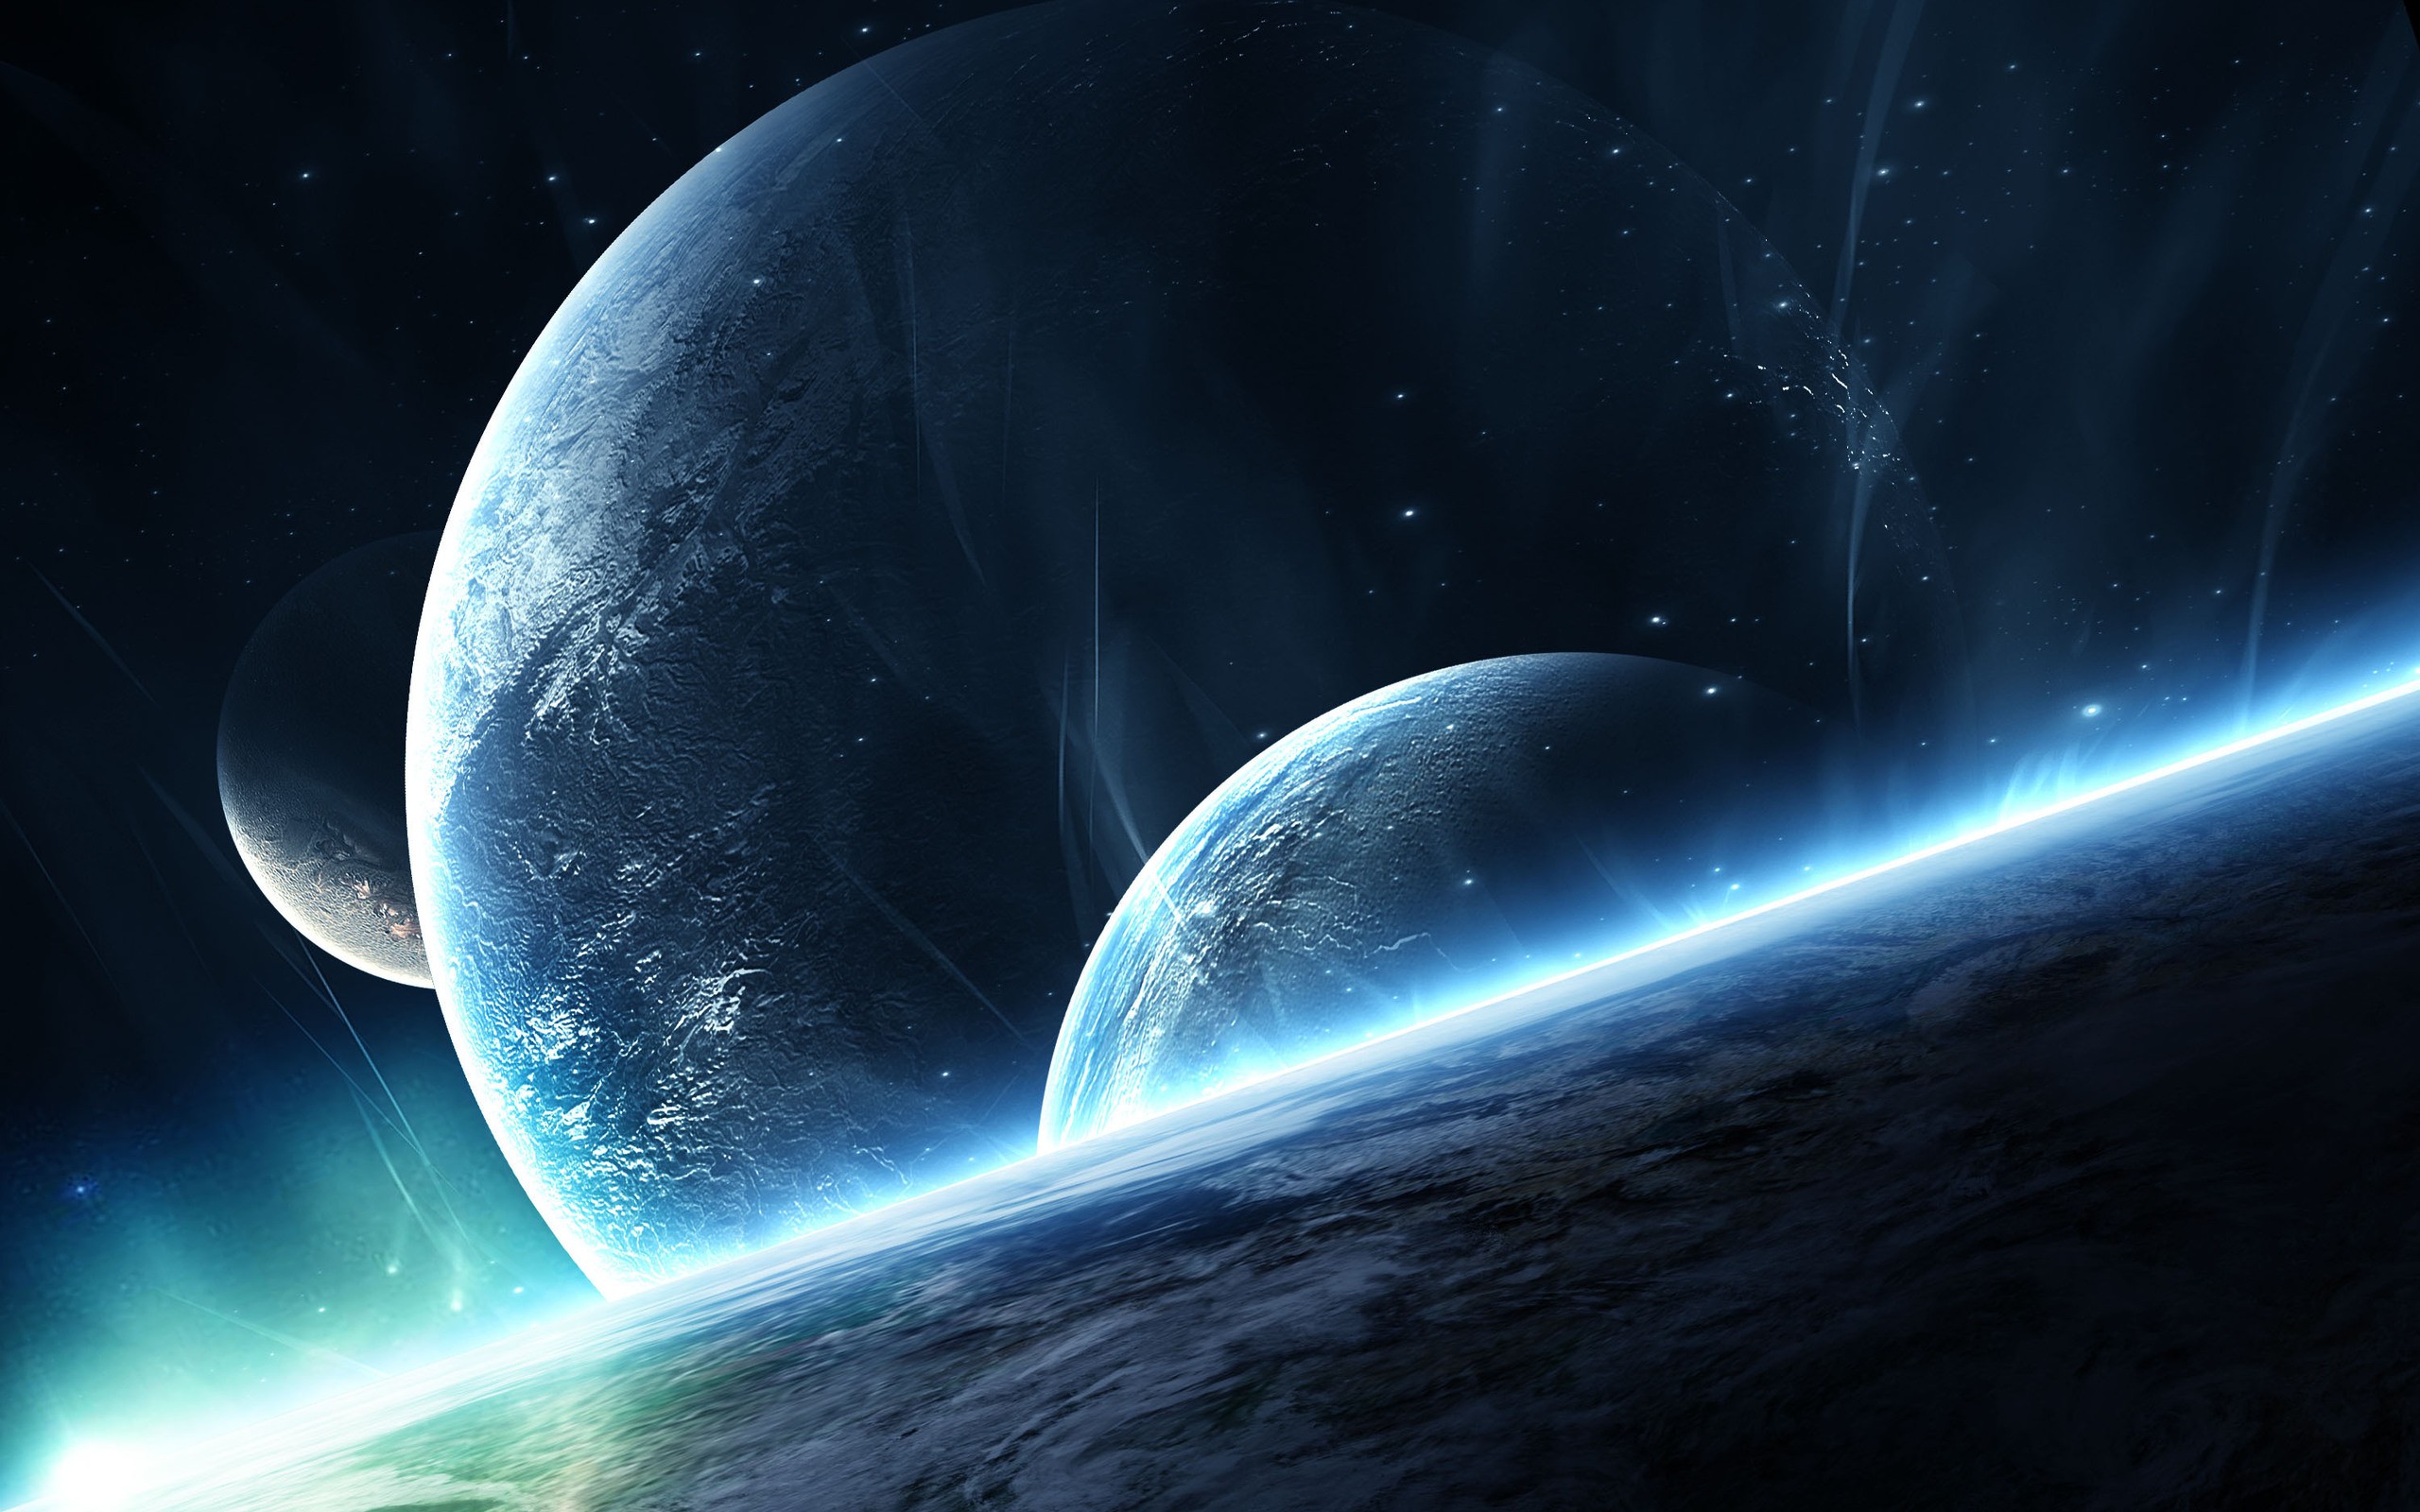 Outer Space Wallpapers Full HD Free Desktop Backgrounds